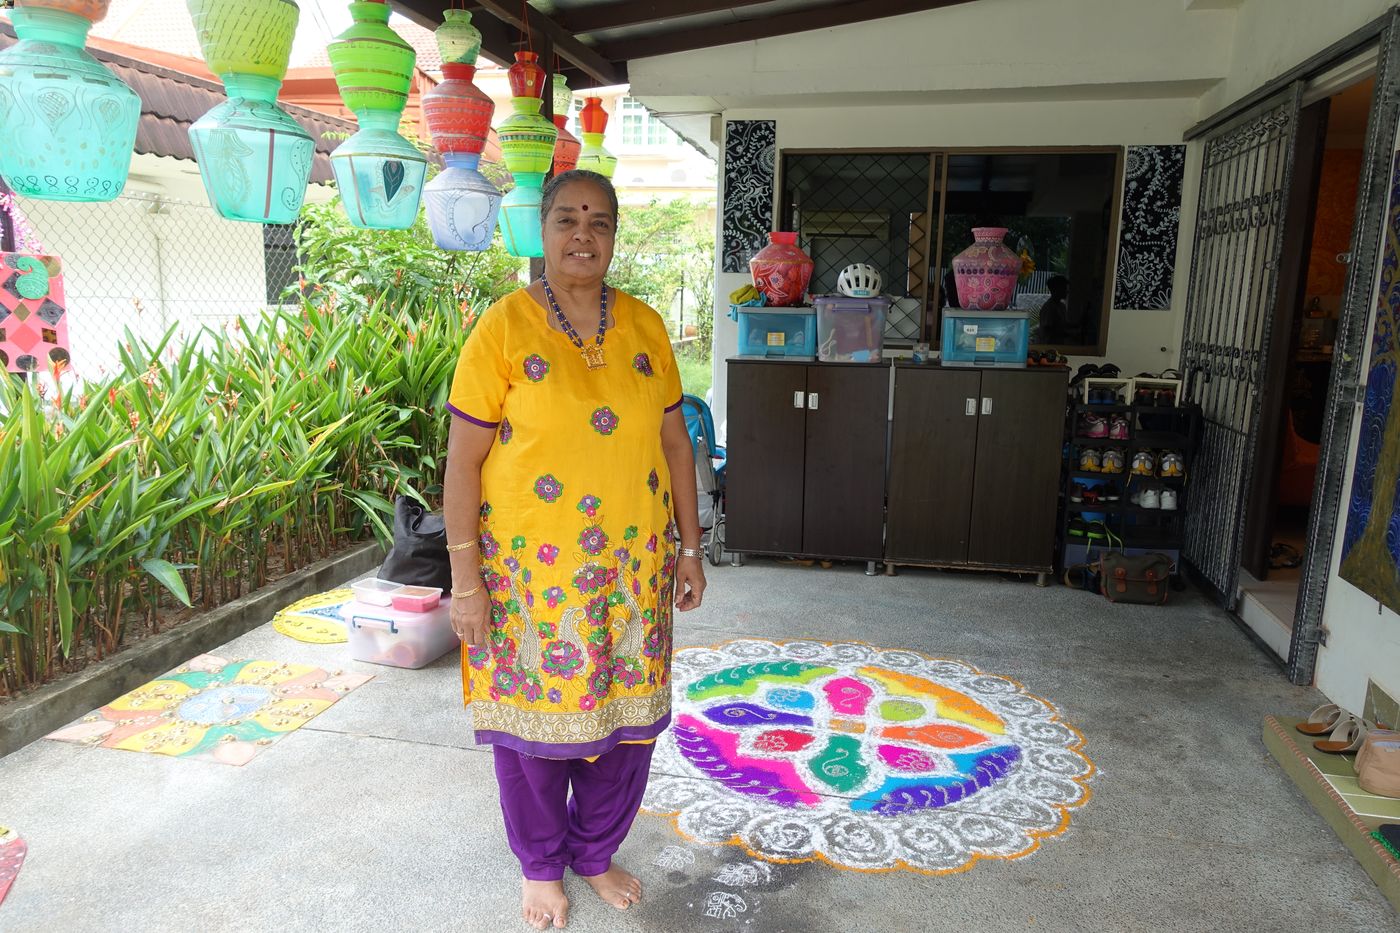 Singapore-based artist Ms Vijayalakshmi Mohan with a colourful rangoli she created. These floor decorations are often drawn outside one’s home to bring good luck.